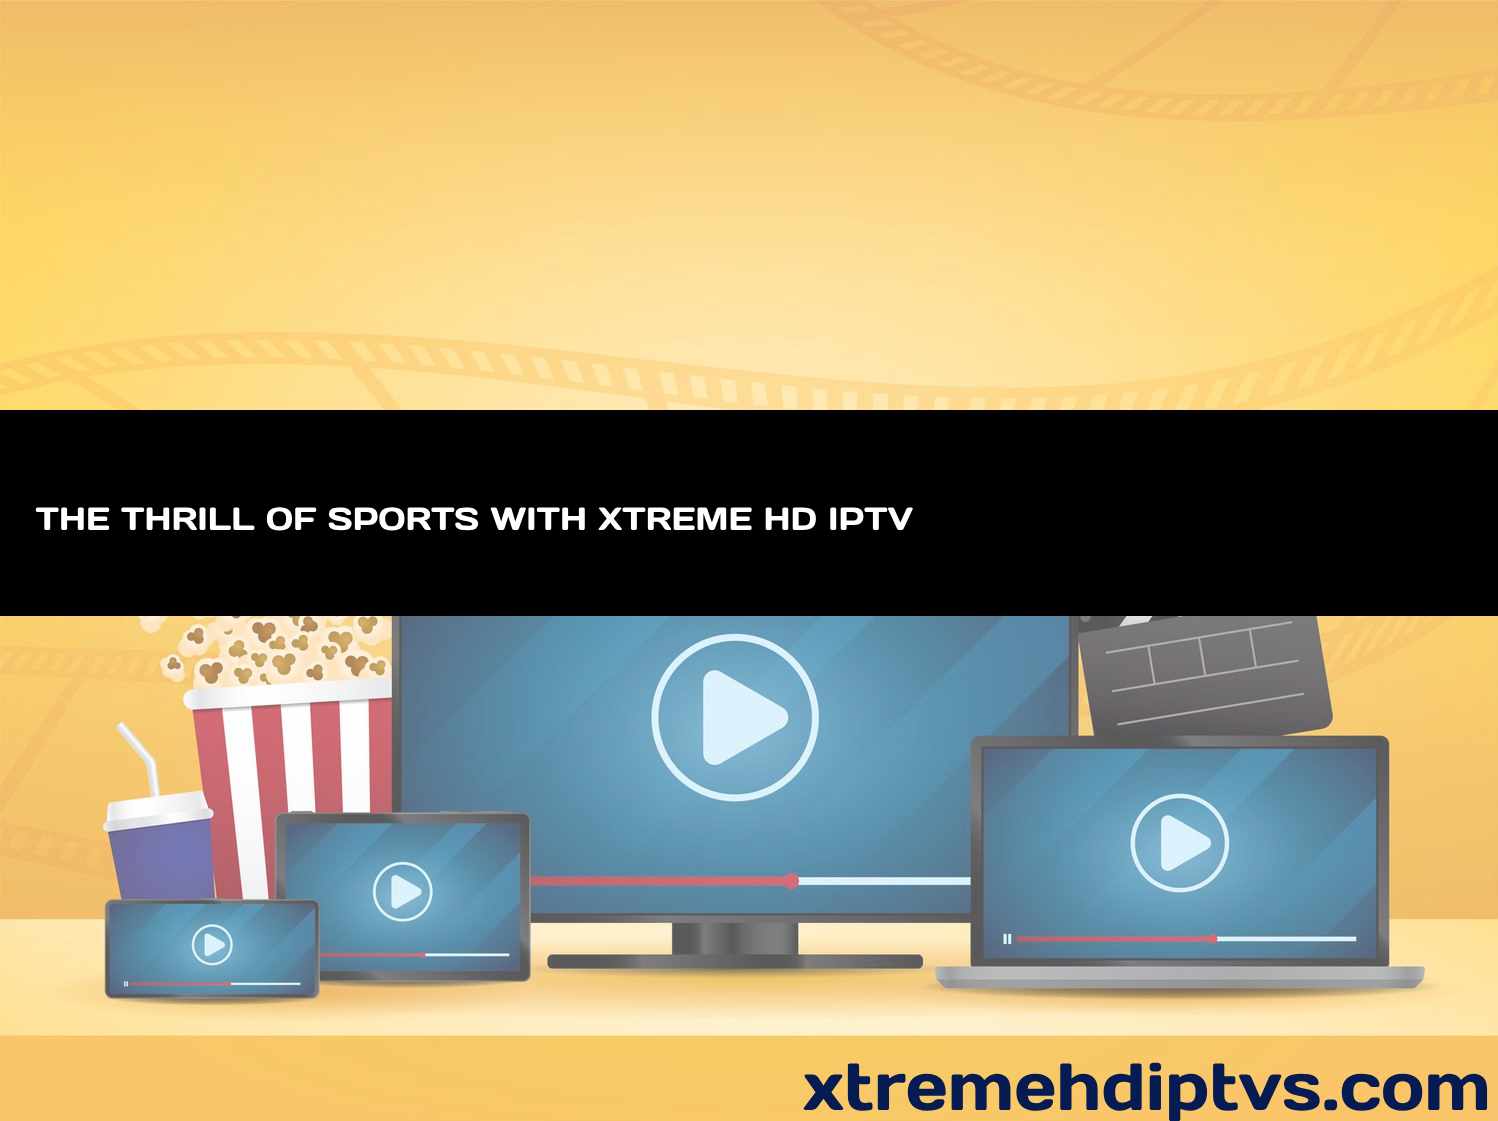 THE THRILL OF SPORTS WITH XTREME HD IPTV